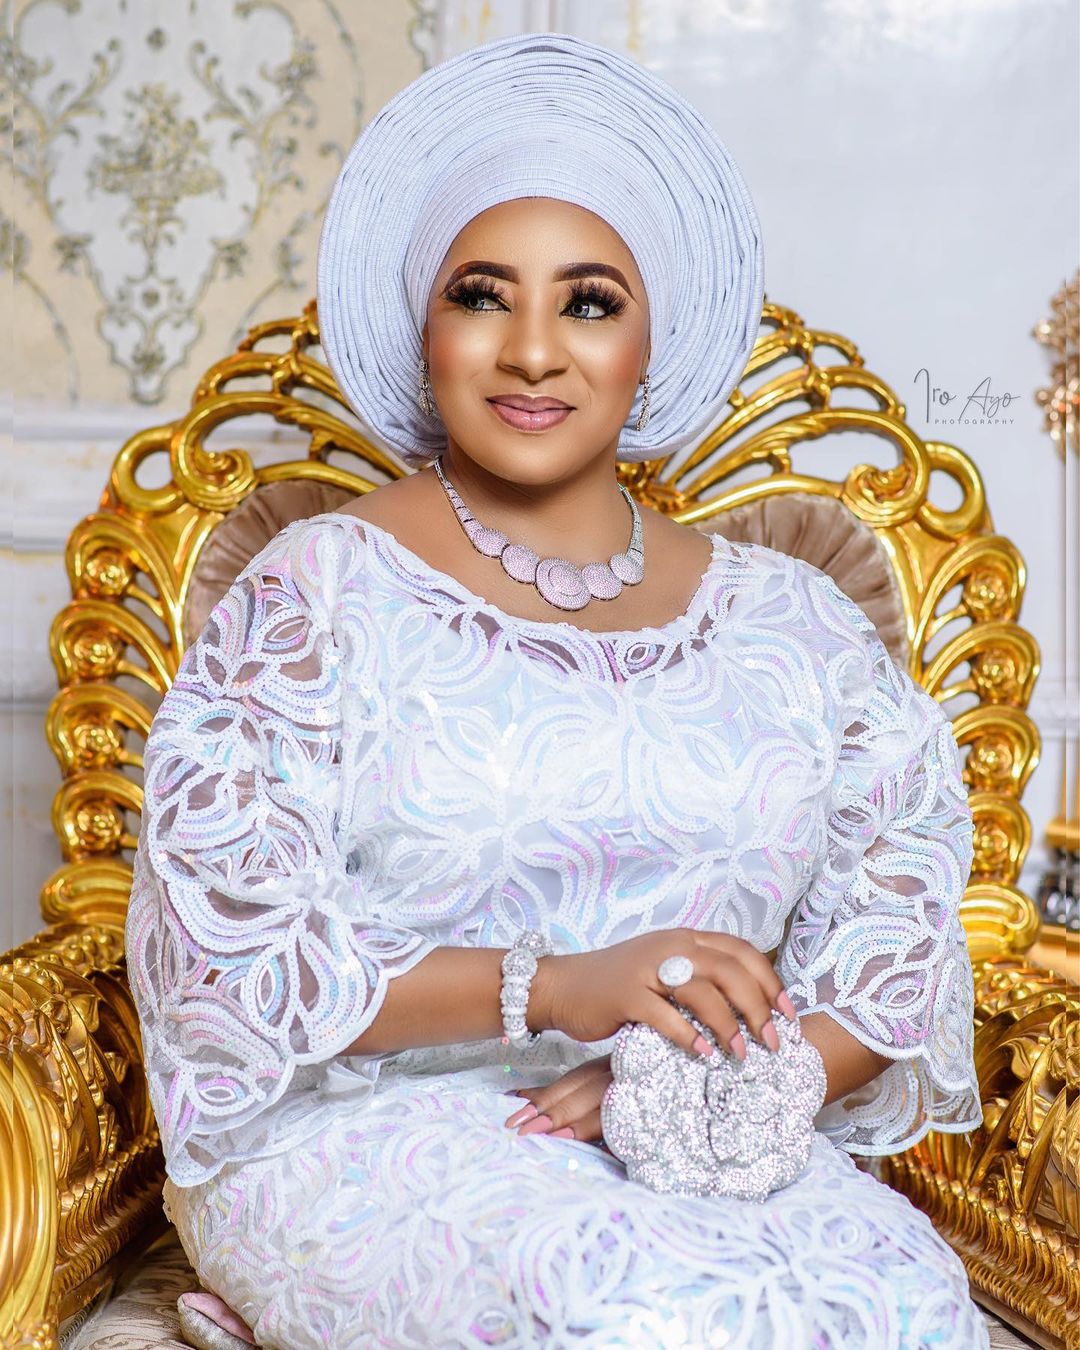 Afeez Owo Reaffirms Love For Wife, Mide Martins, In Birthday Post